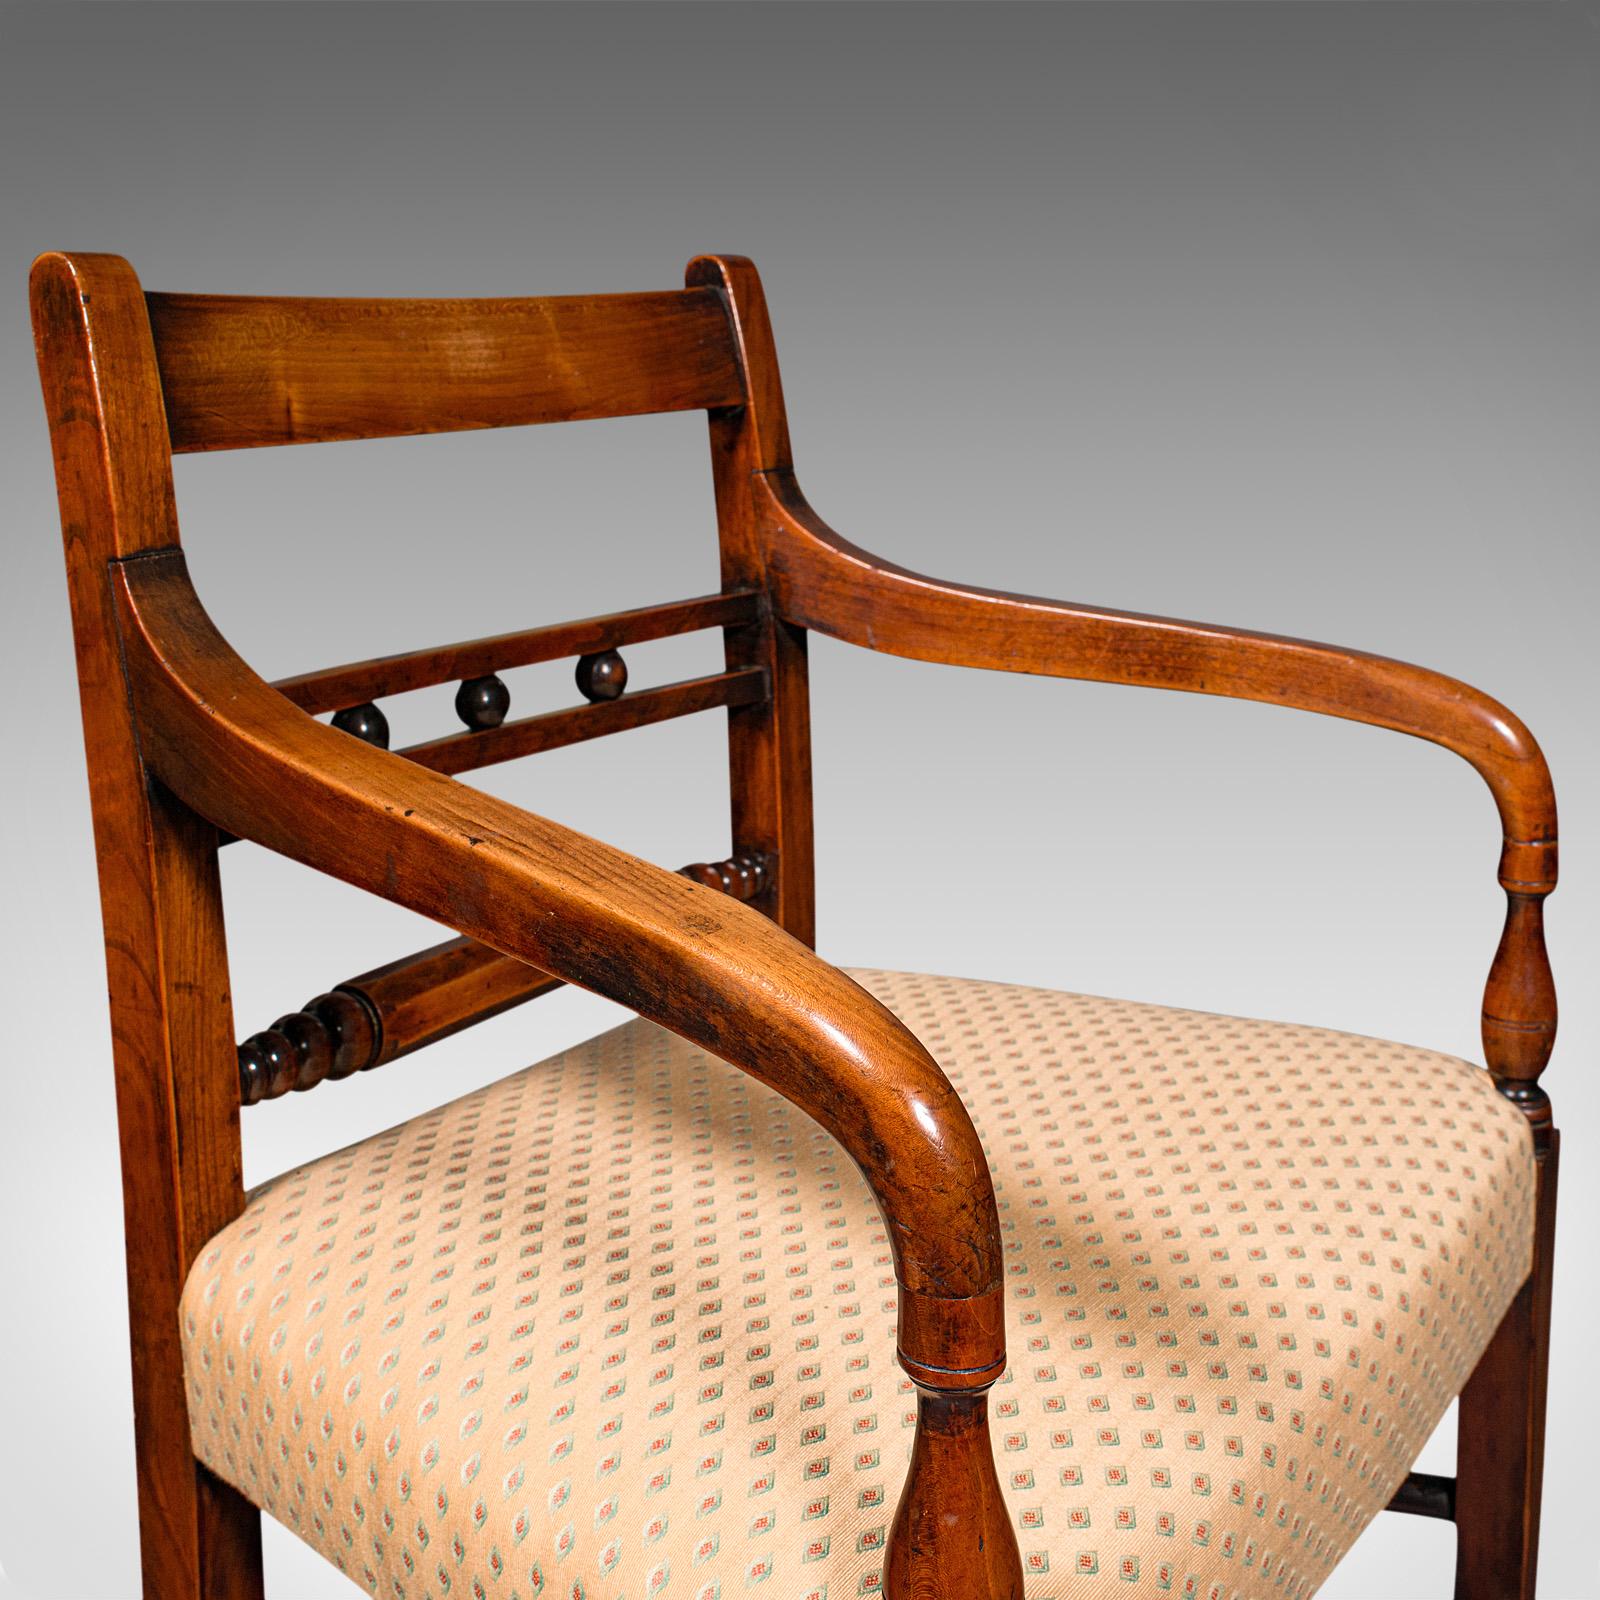 Antique Elbow Chair, English, Fruitwood, Office, Desk Seat, Victorian, C.1870 For Sale 3